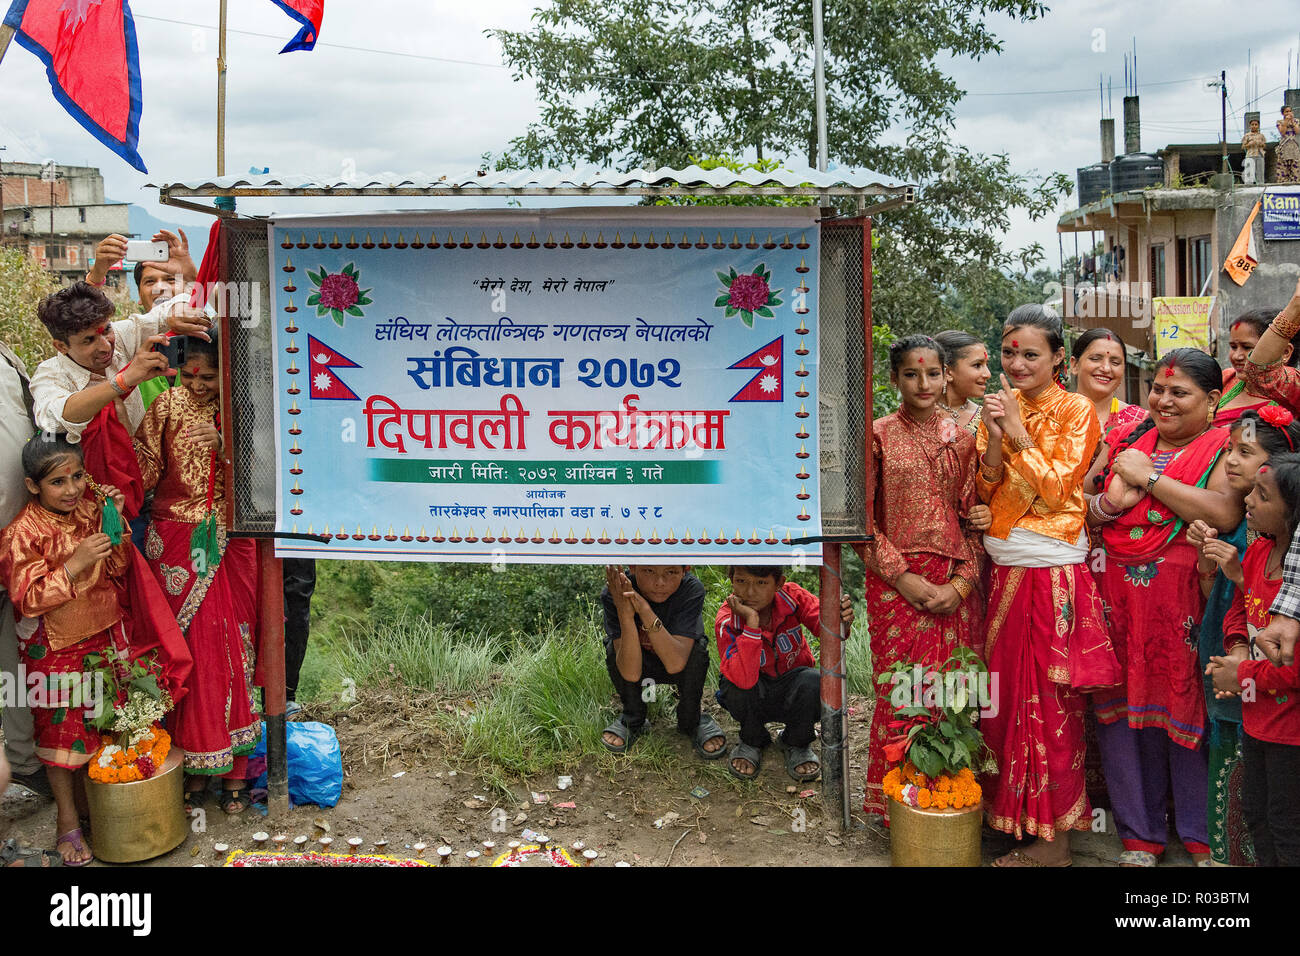 Constitution Day (Sept. 20) celebration in a small village in Nepal Stock Photo